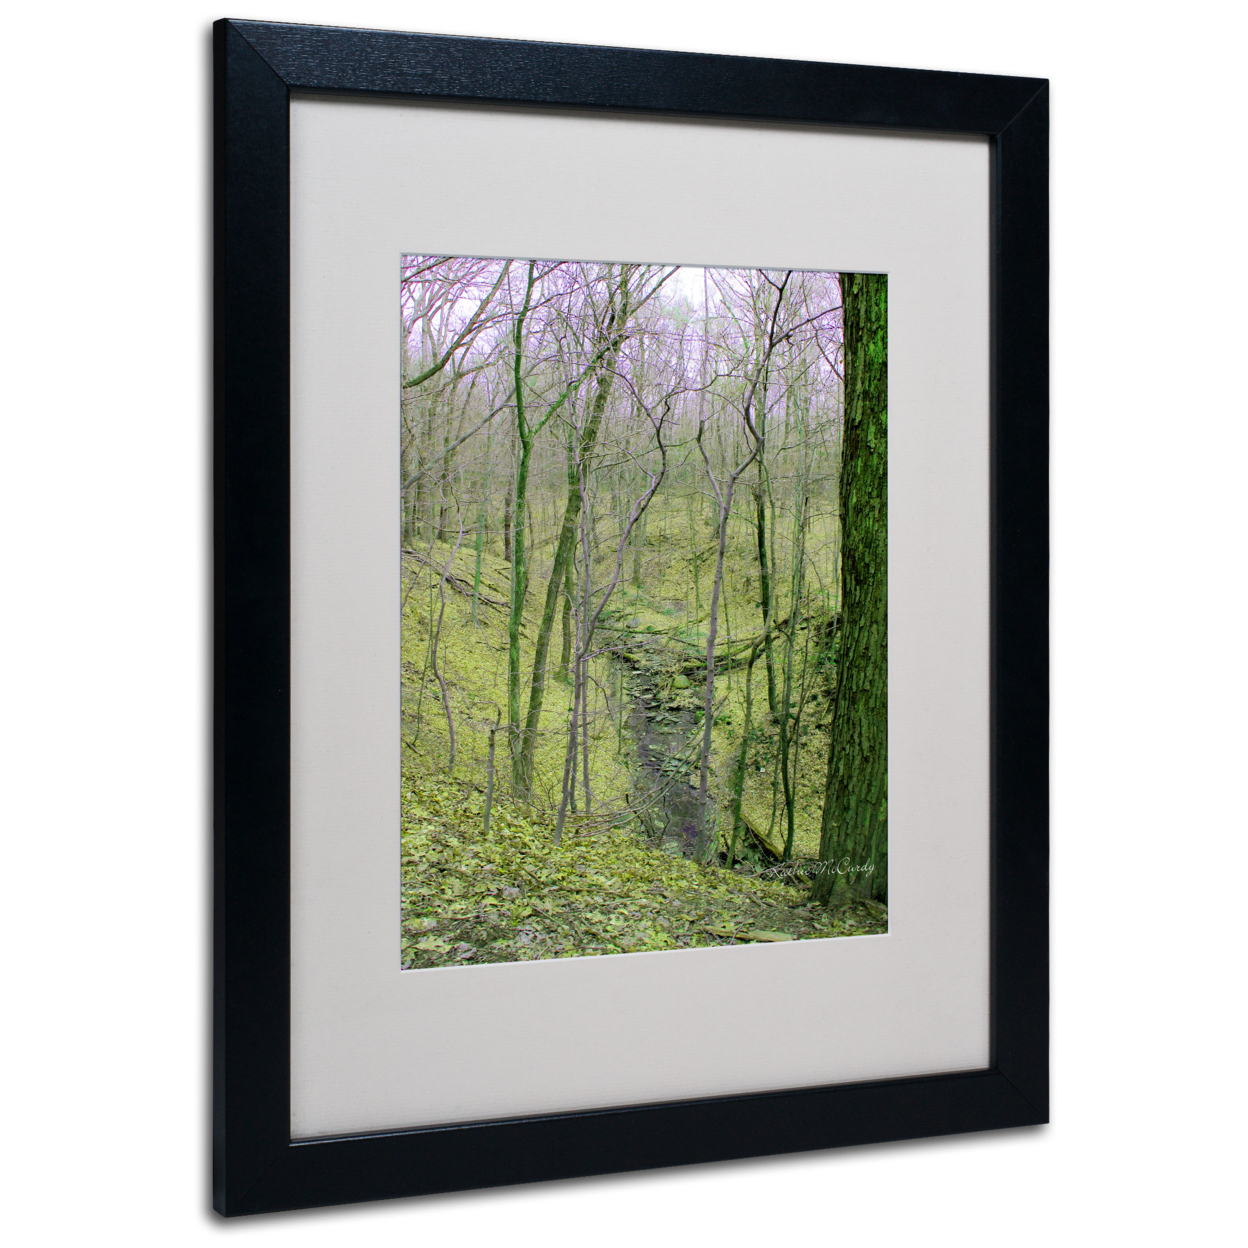 Kathie McCurdy 'Surreal Woods' Black Wooden Framed Art 18 X 22 Inches